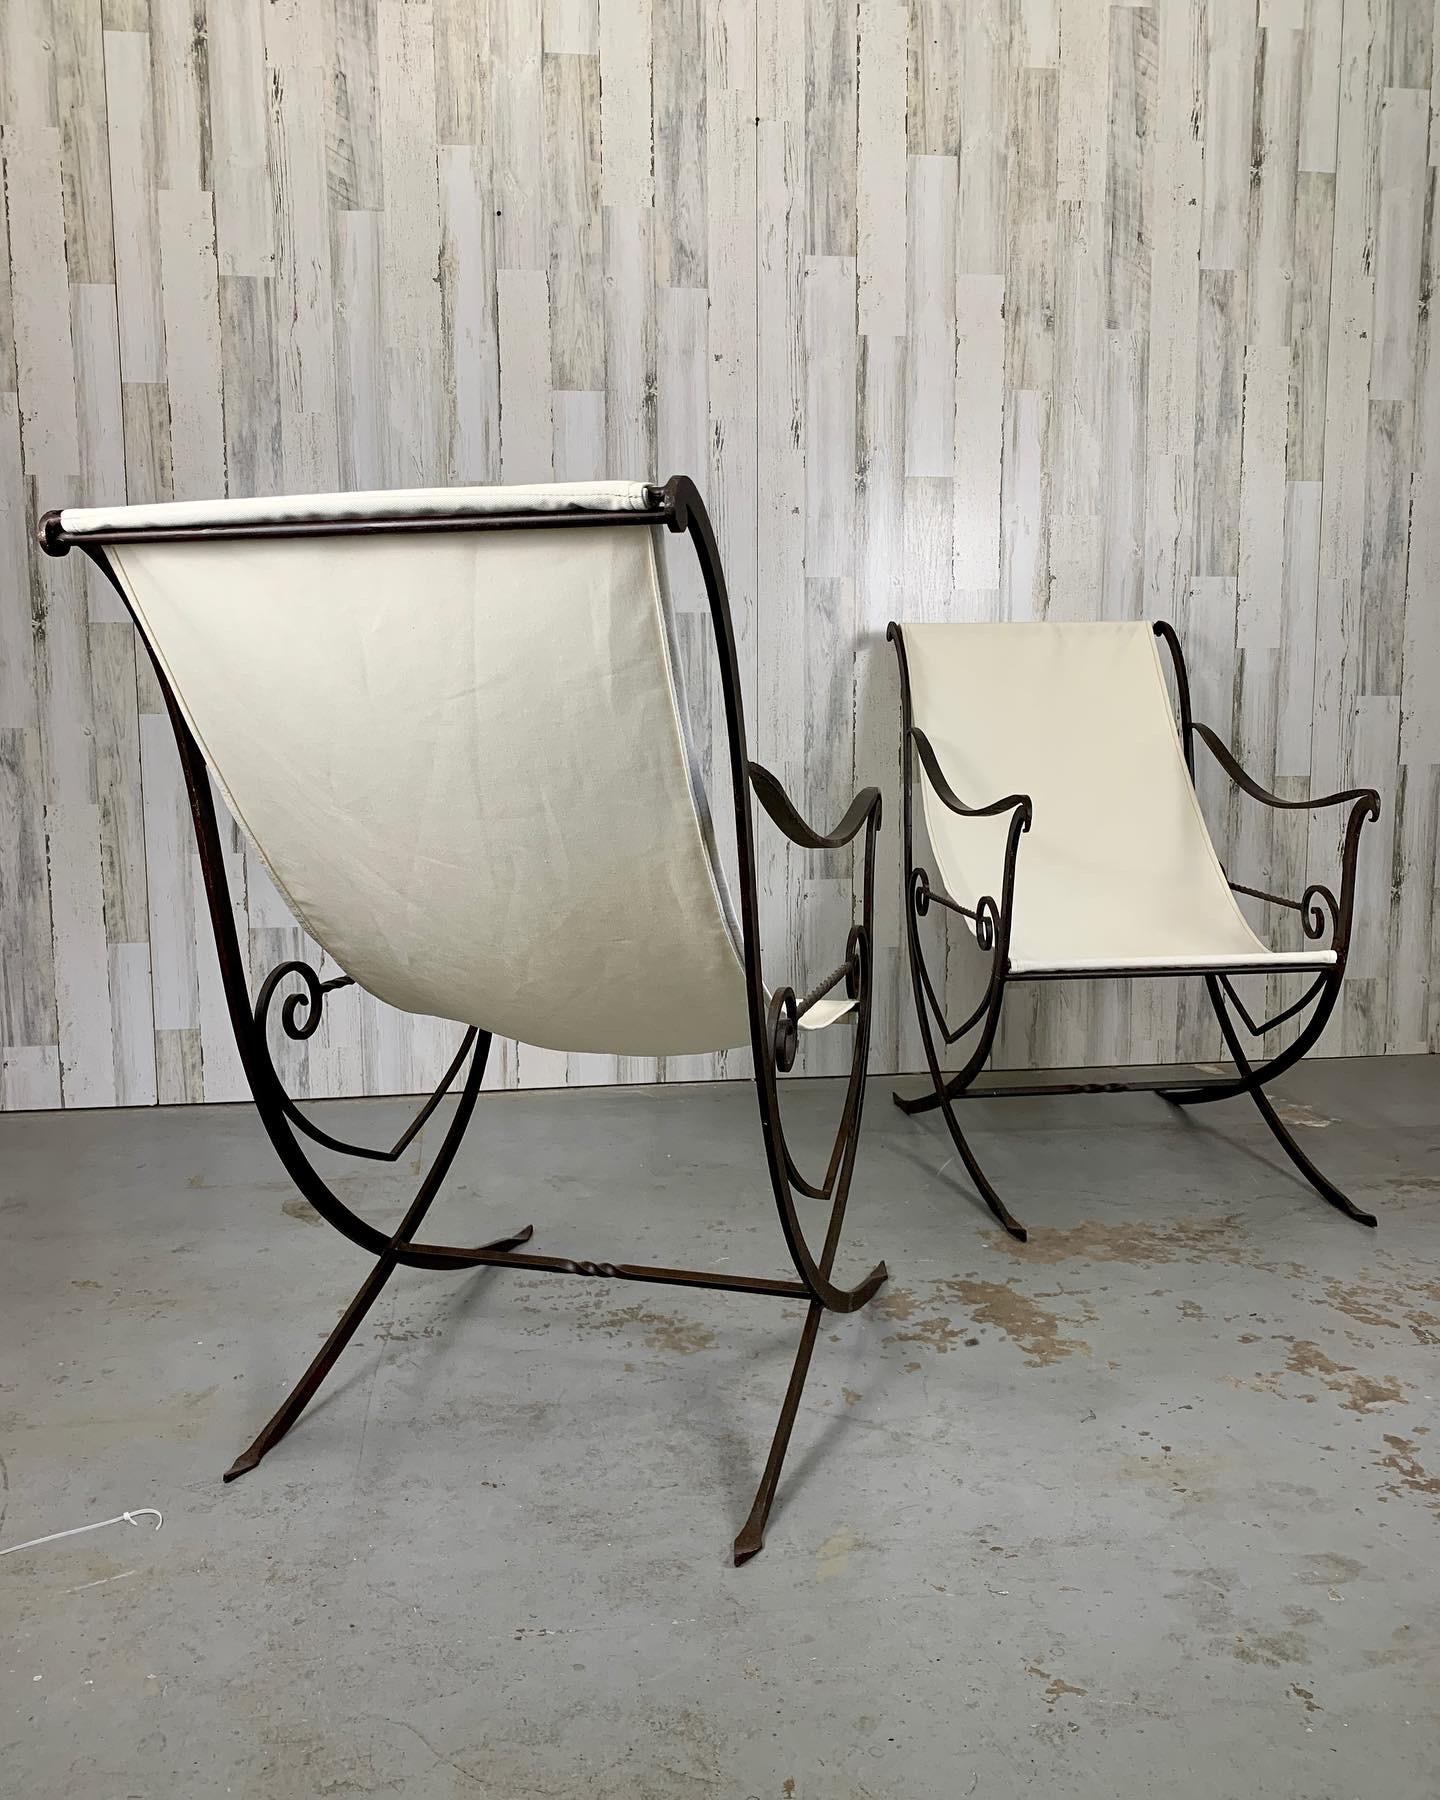 Sculpted hand wrought iron with new off-white canvas sling. Very rustic and elegant at the same time with some of the original pale green paint on the iron.
These can be used either inside or outside. 
Because they were hand made they are slightly